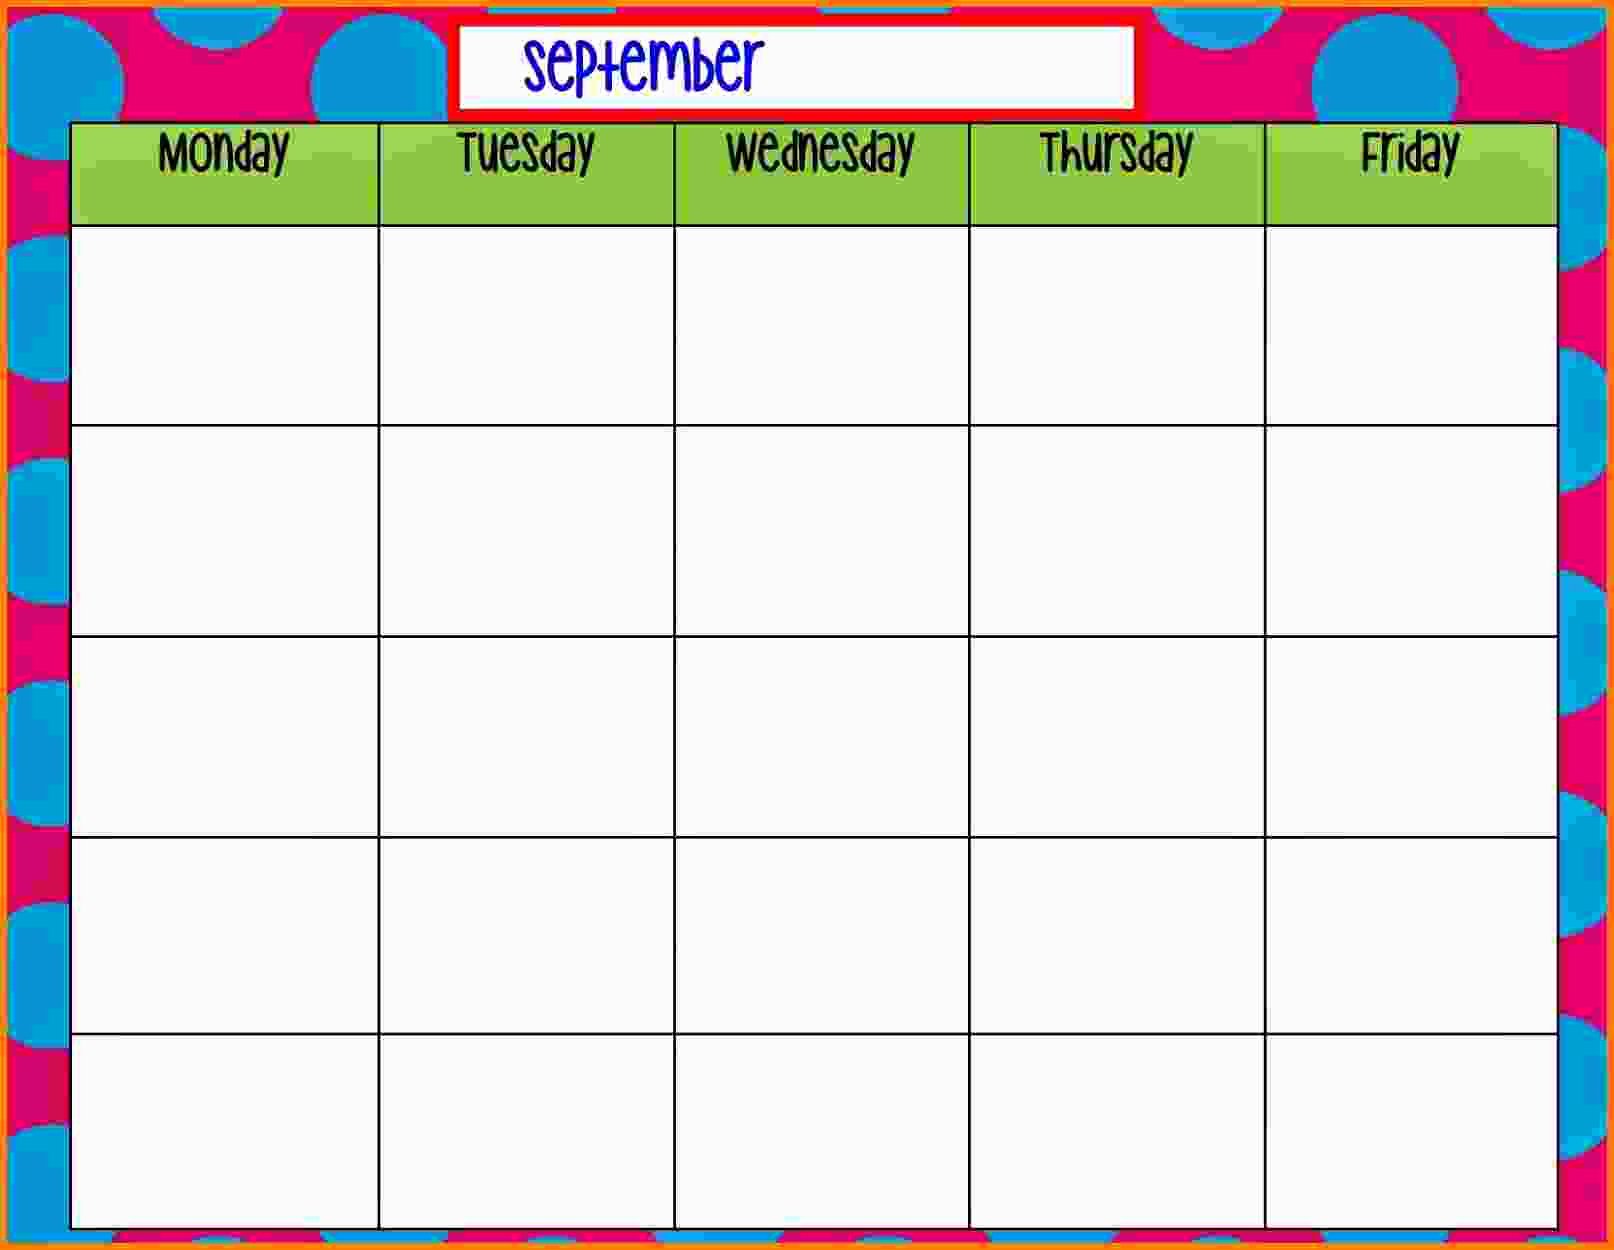 Monday to Friday Schedule Template Best Of 10 Monday Thru Friday